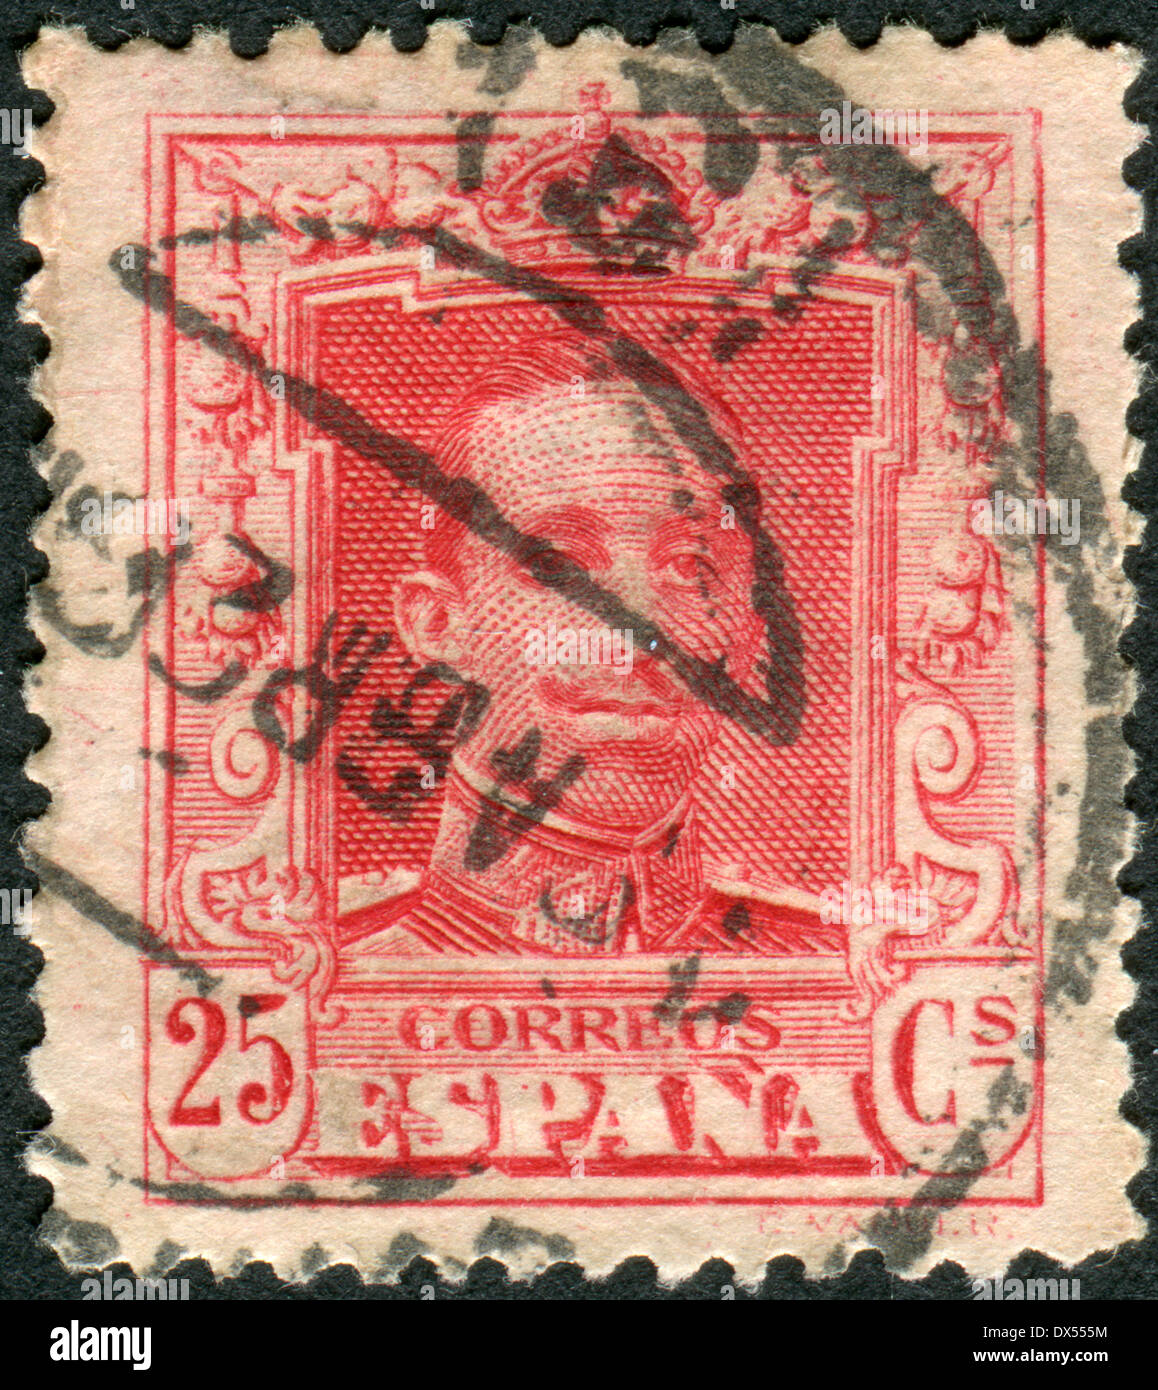 SPAIN - CIRCA 1922: Postage stamp printed in Spain, shows King Alfonso XIII, circa 1922 Stock Photo